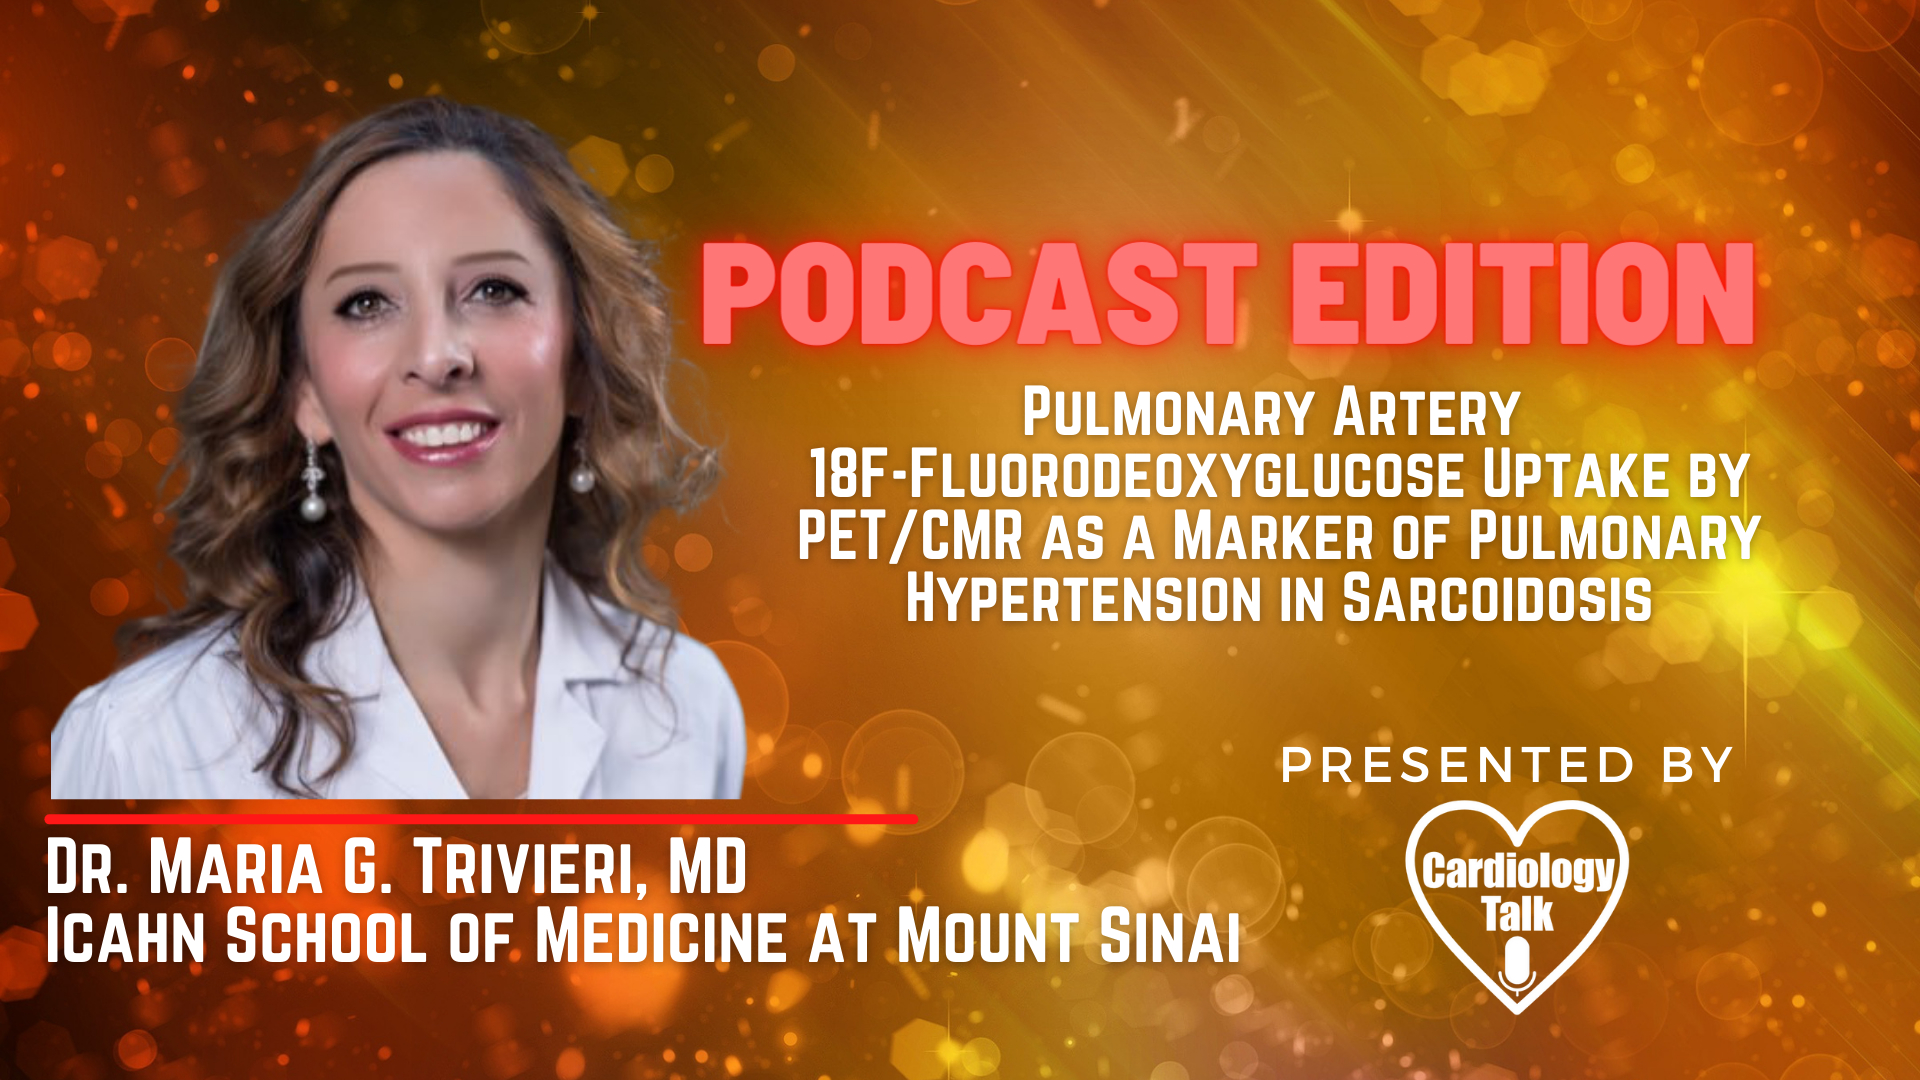 Podcast- Dr. Maria G. Trivieri, MD - Pulmonary Artery 18F-Fluorodeoxyglucose Uptake by PET/CMR as a Marker of Pulmonary Hypertension in Sarcoidosis @mgtrivieri #Hypertension #MountSinaiHe...